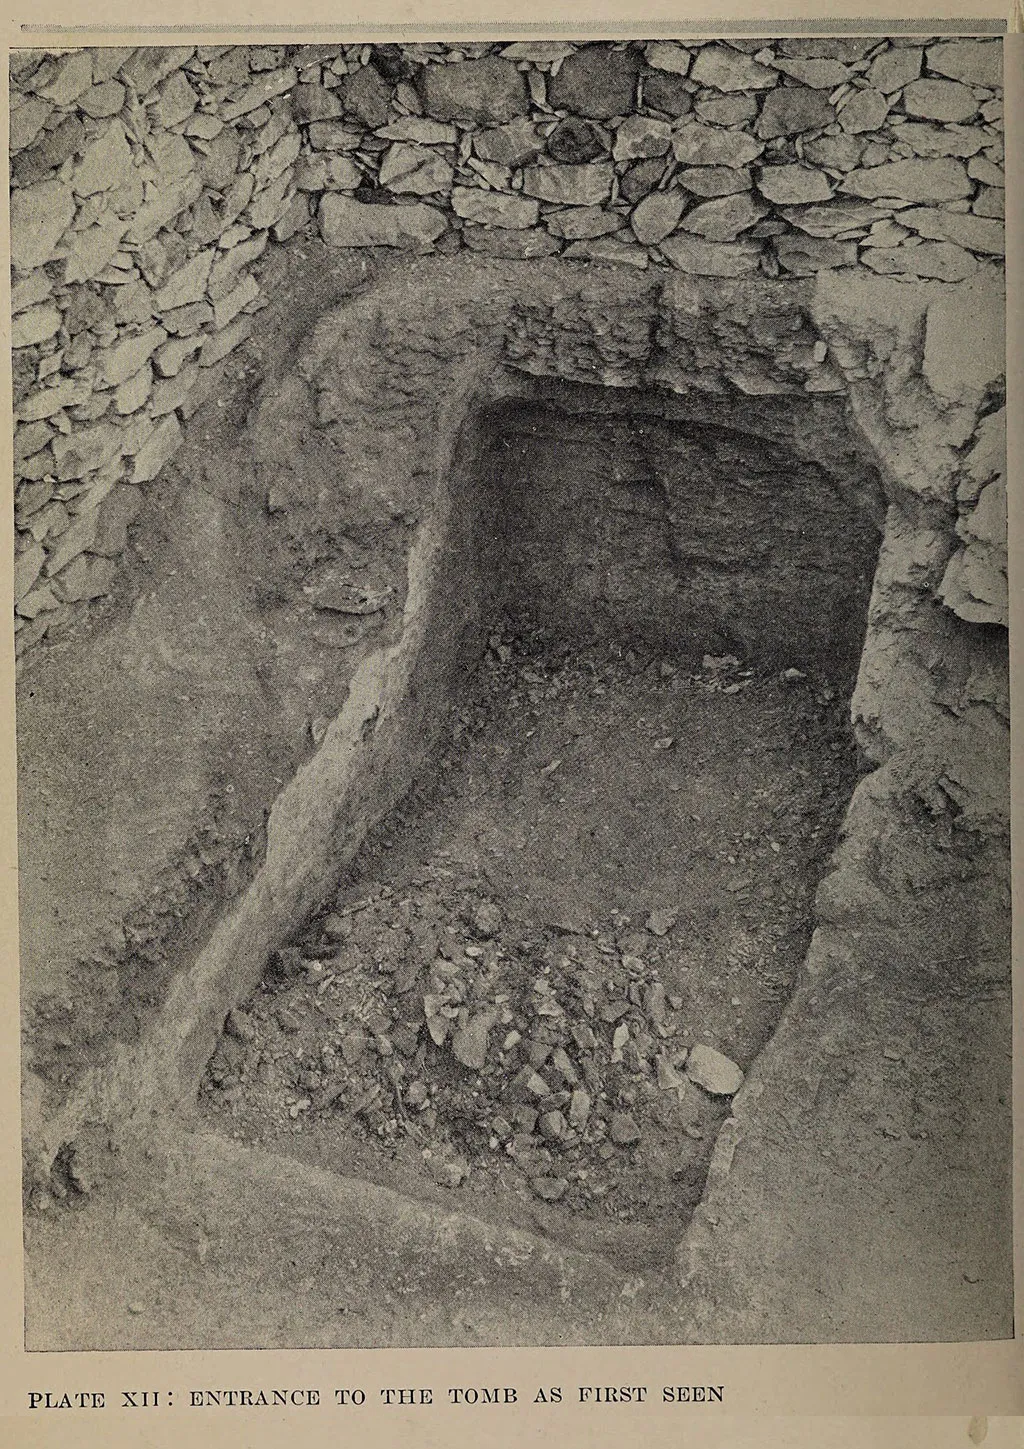 The entrance to Tut's tomb